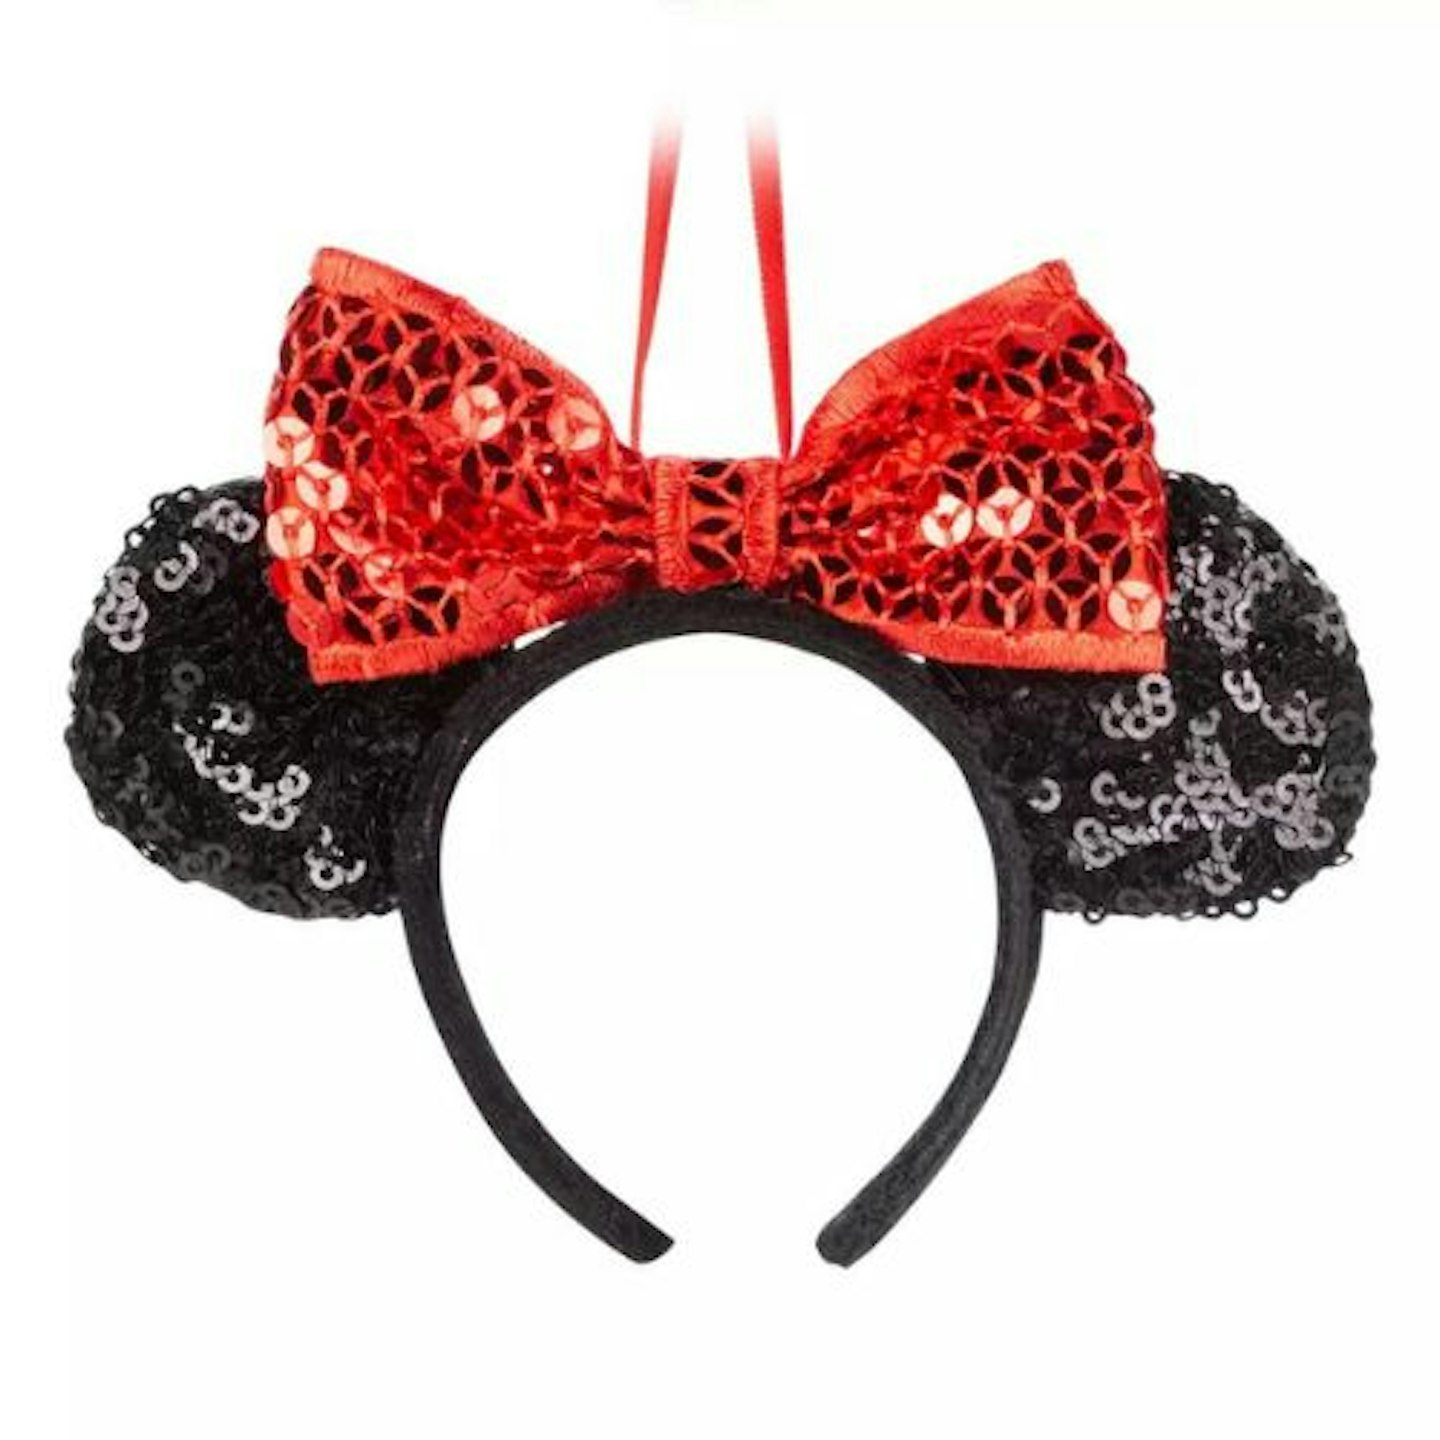 Disney Store Minnie Mouse Classic Ears Headband Hanging Ornament